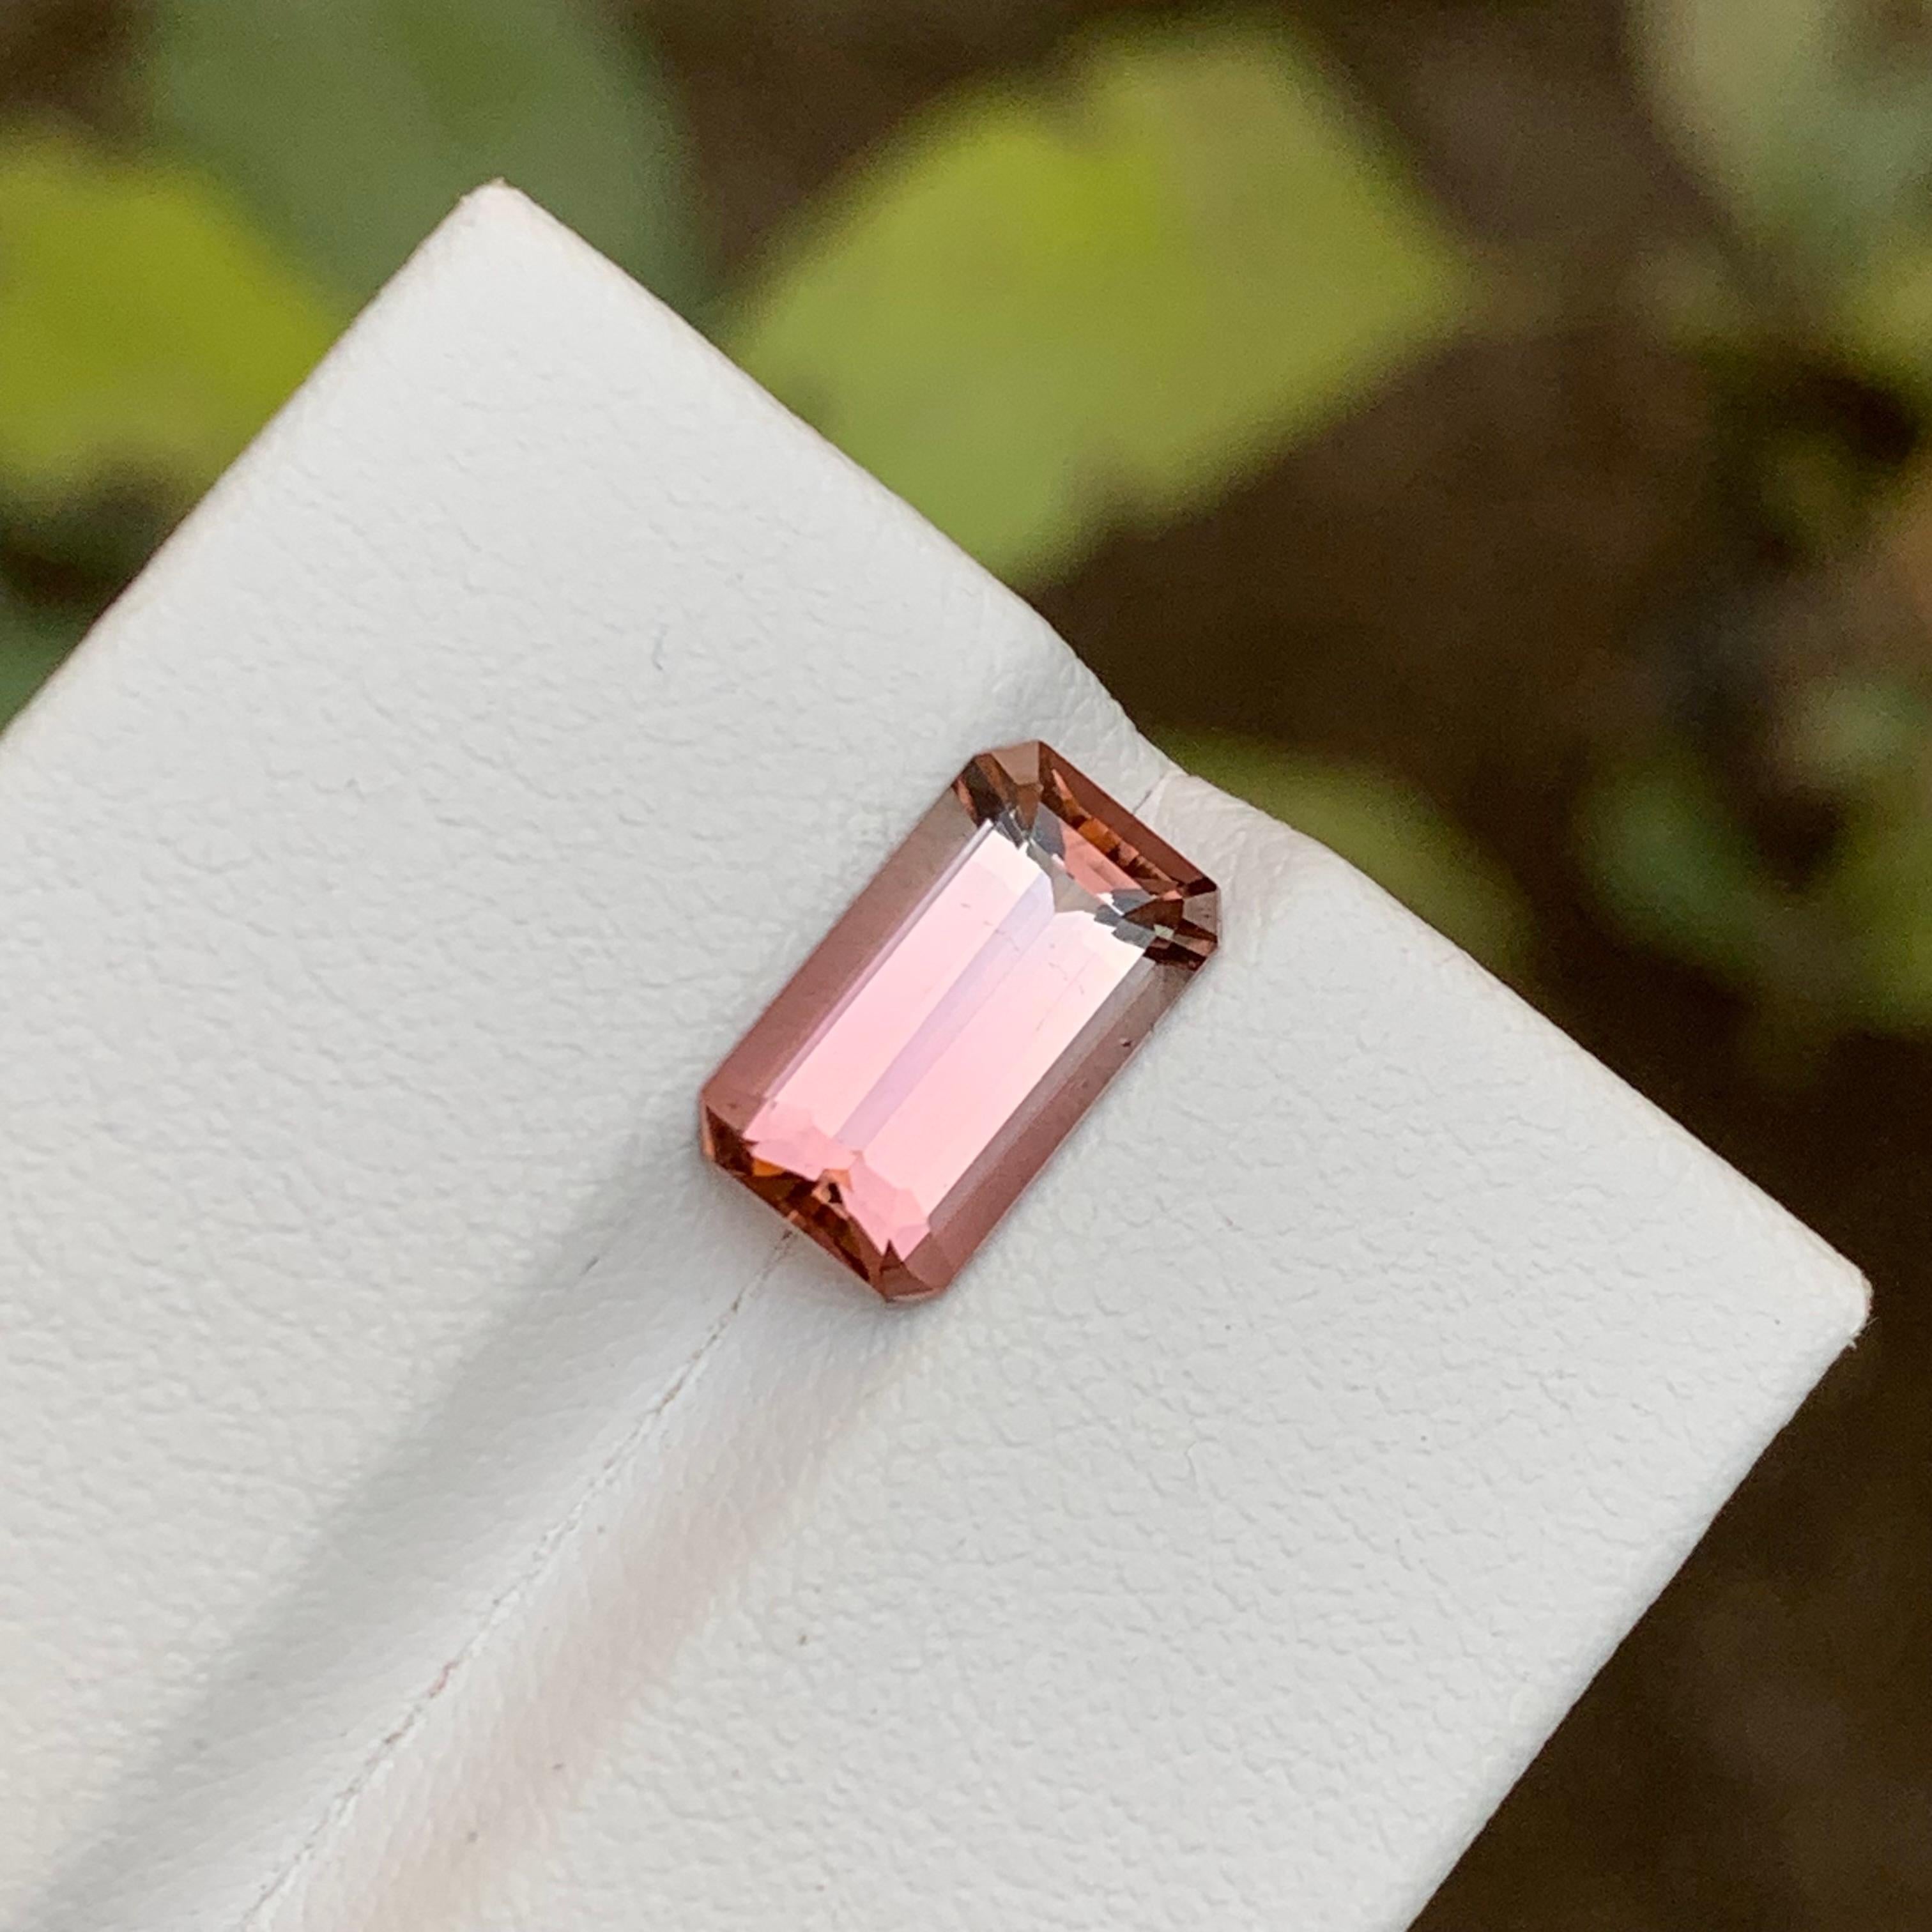 Rare Pink Natural Tourmaline Loose Gemstone 2.45 Ct Emerald Cut for Ring/Pendant For Sale 2